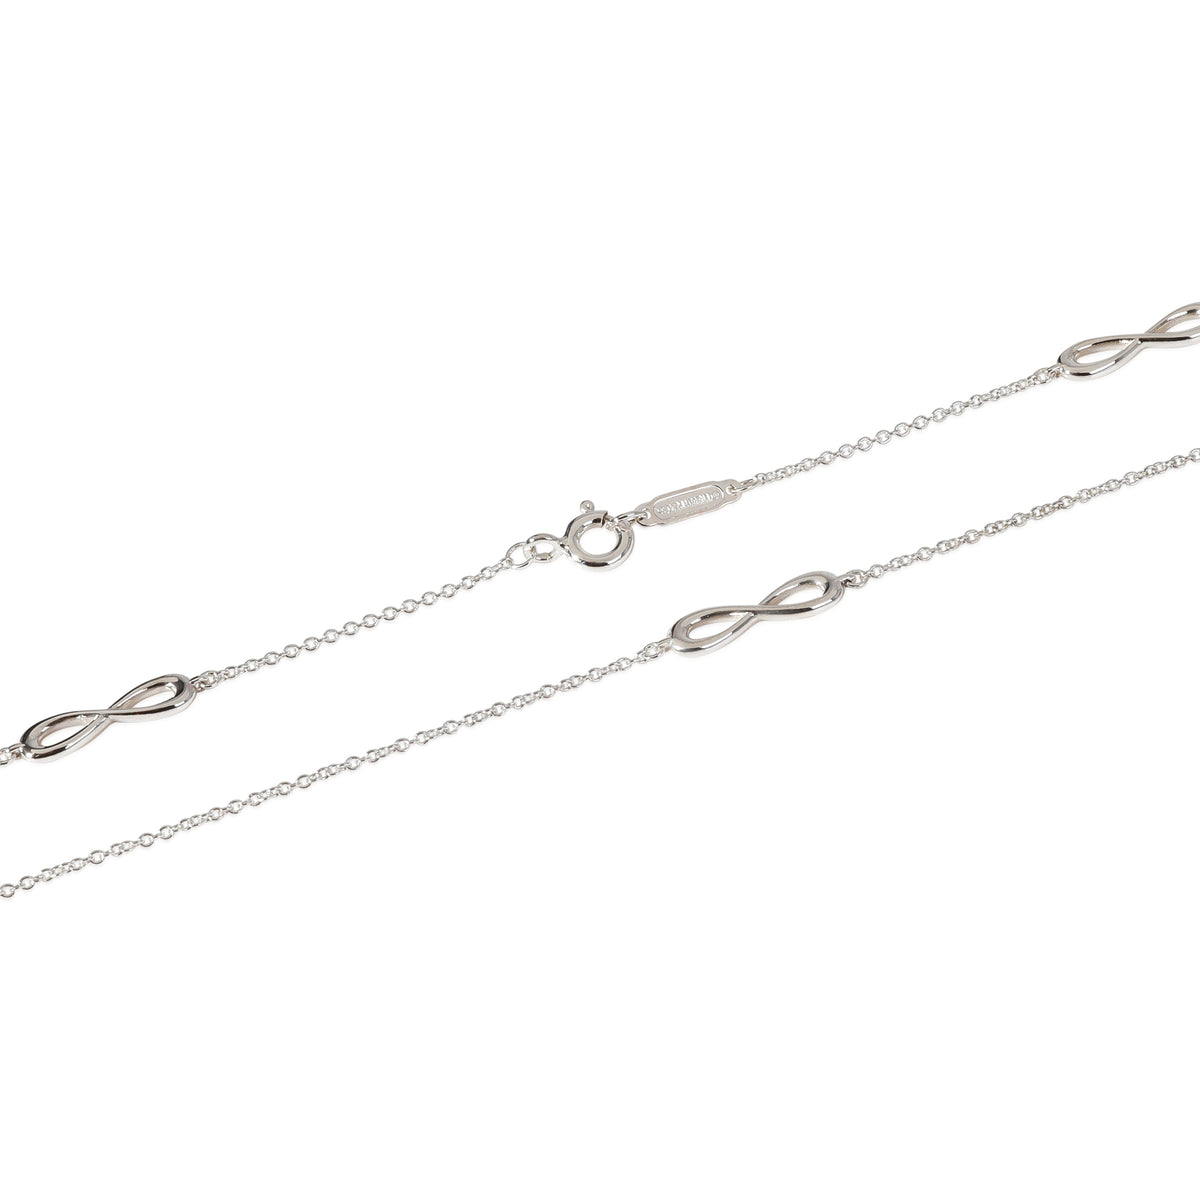 Tiffany & Co. Endless Infinity Station Necklace in Sterling Silver